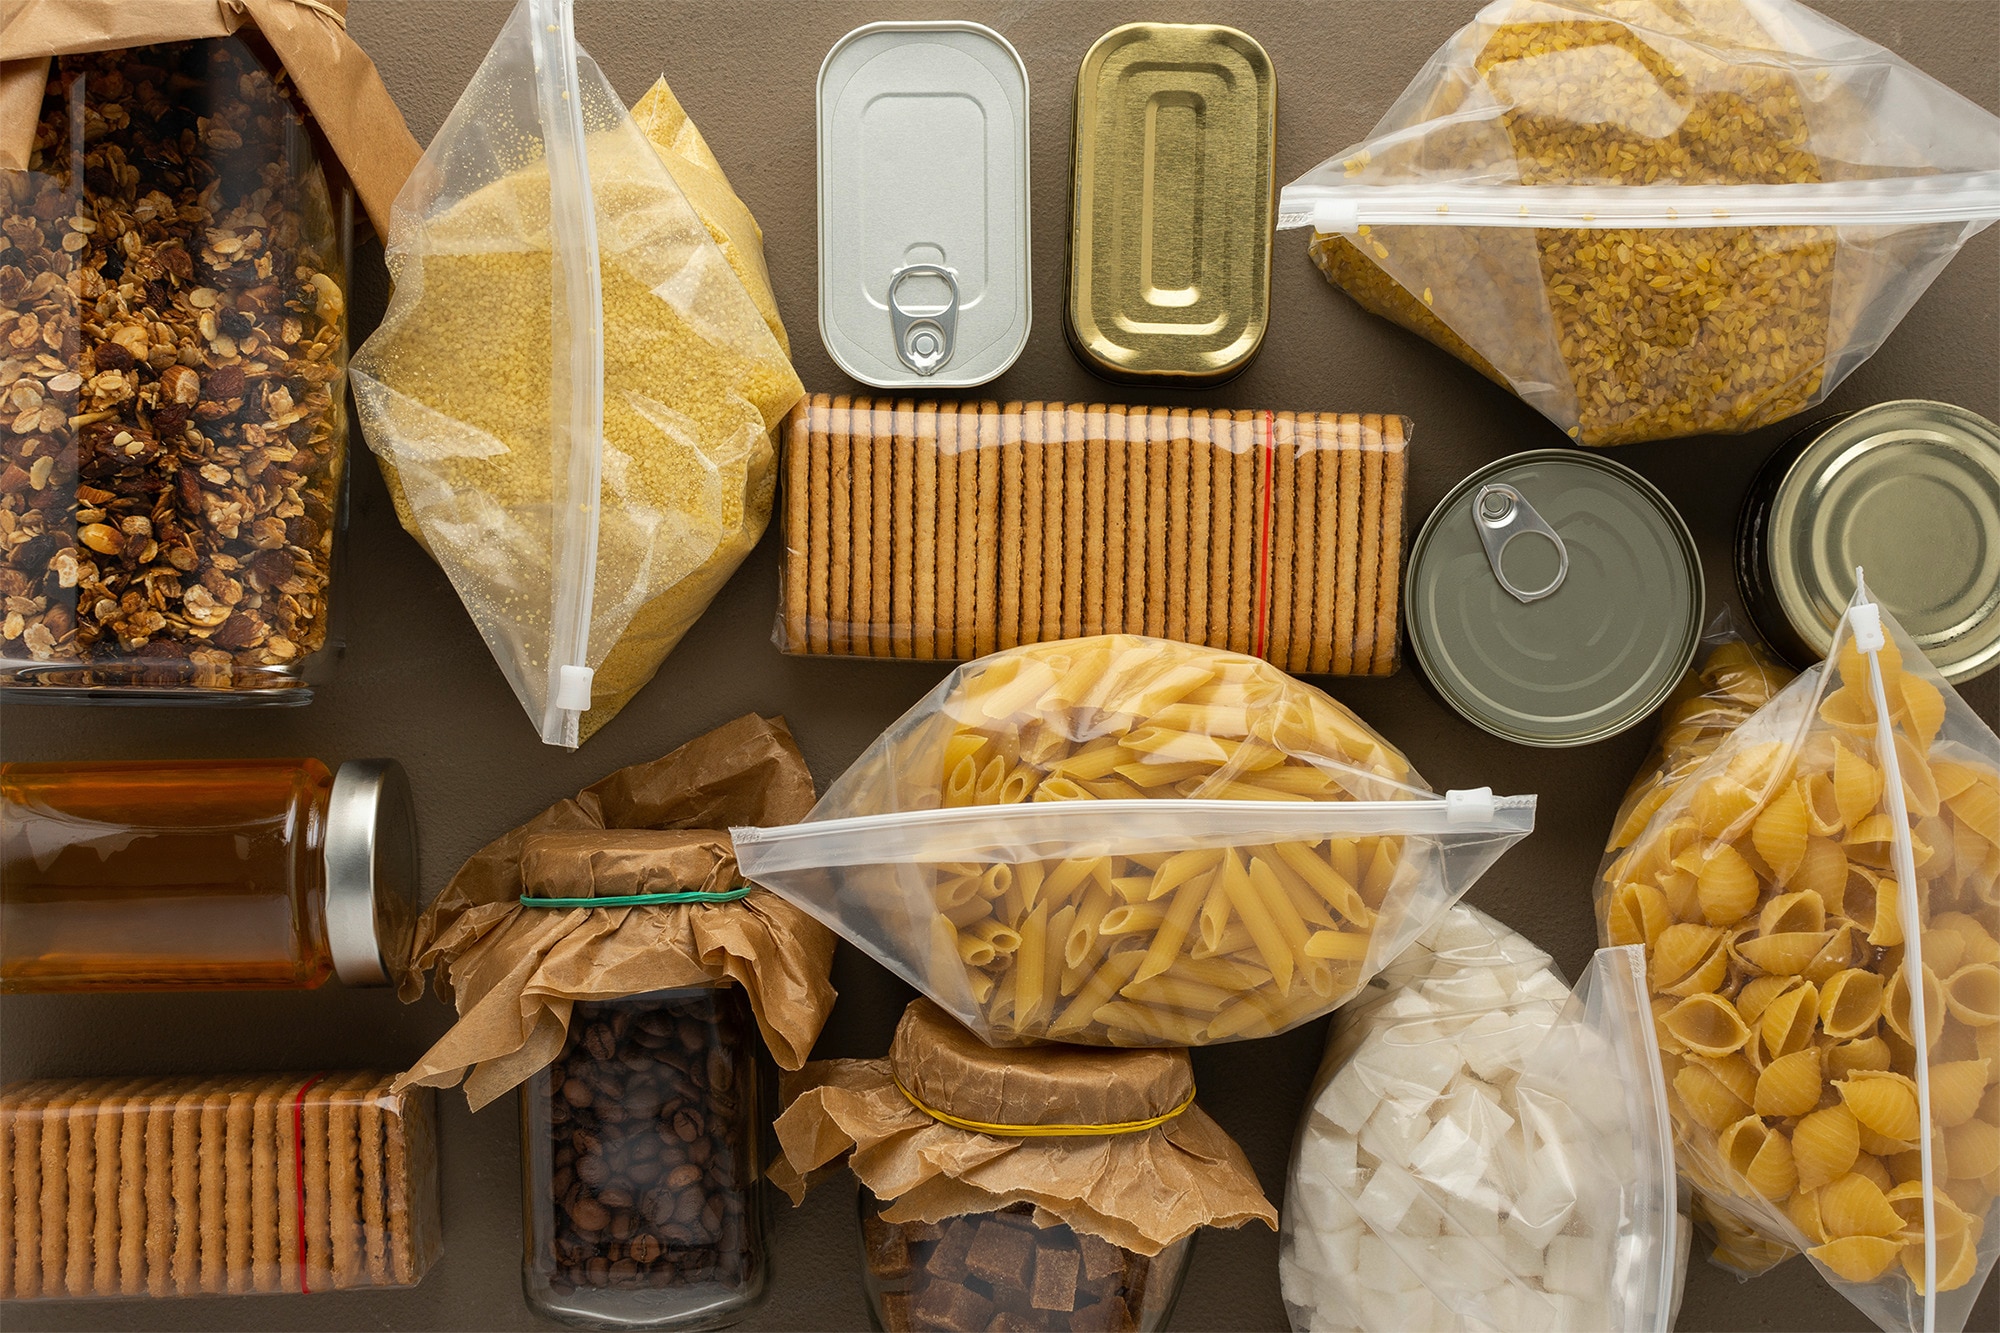 Emergency Food Items to Pack in Your Family's Go Bag